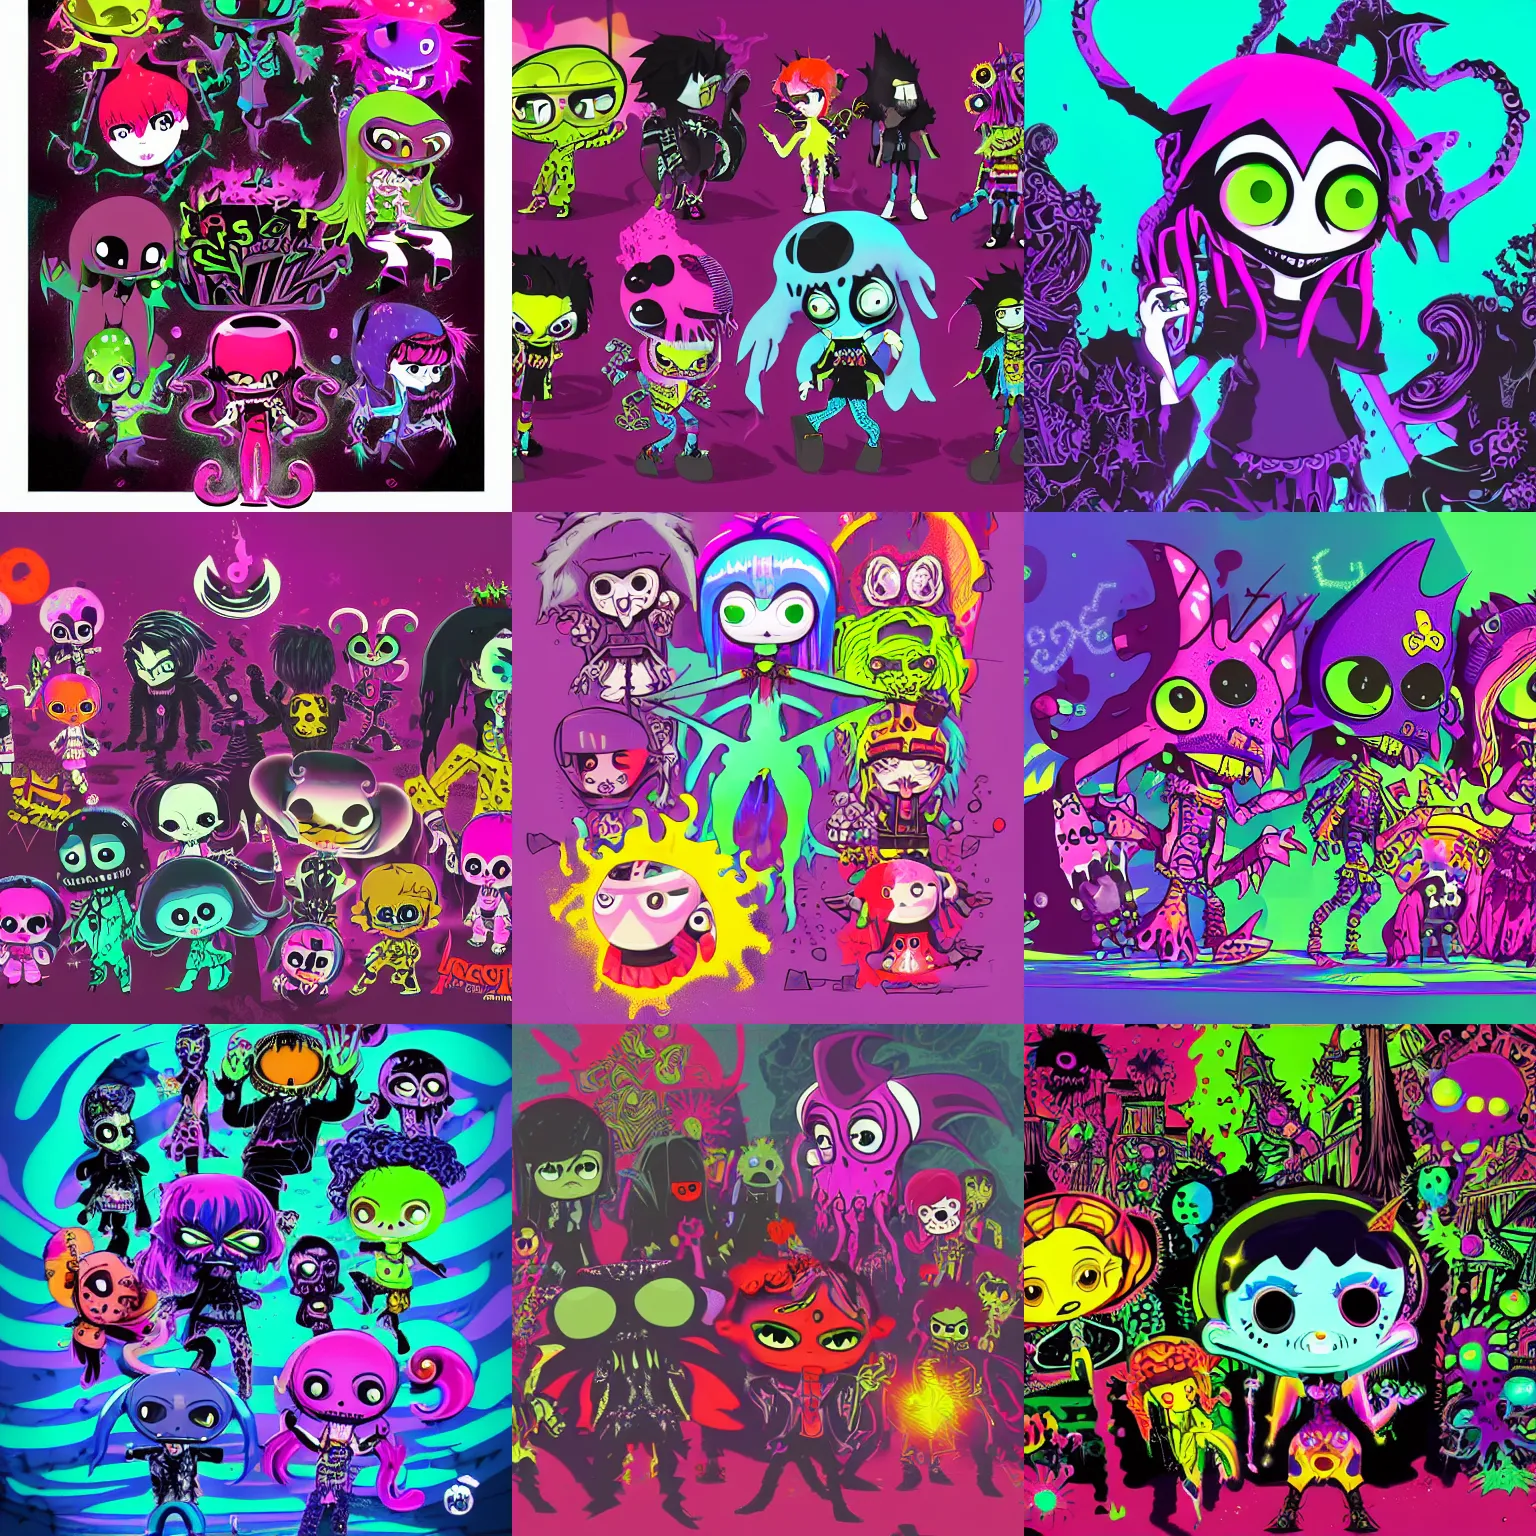 Prompt: CGI lisa frank gothic punk vampiric rockstar underwater chromatic aberration vampire squid background designs of various shapes and sizes by genndy tartakovsky and ruby gloom by martin hsu and the creators of fret nice at pieces interactive and splatoon by nintendo and psychonauts by doublefines tim shafer being overseen by Jamie Hewlett from gorillaz for splatoon by nintendo